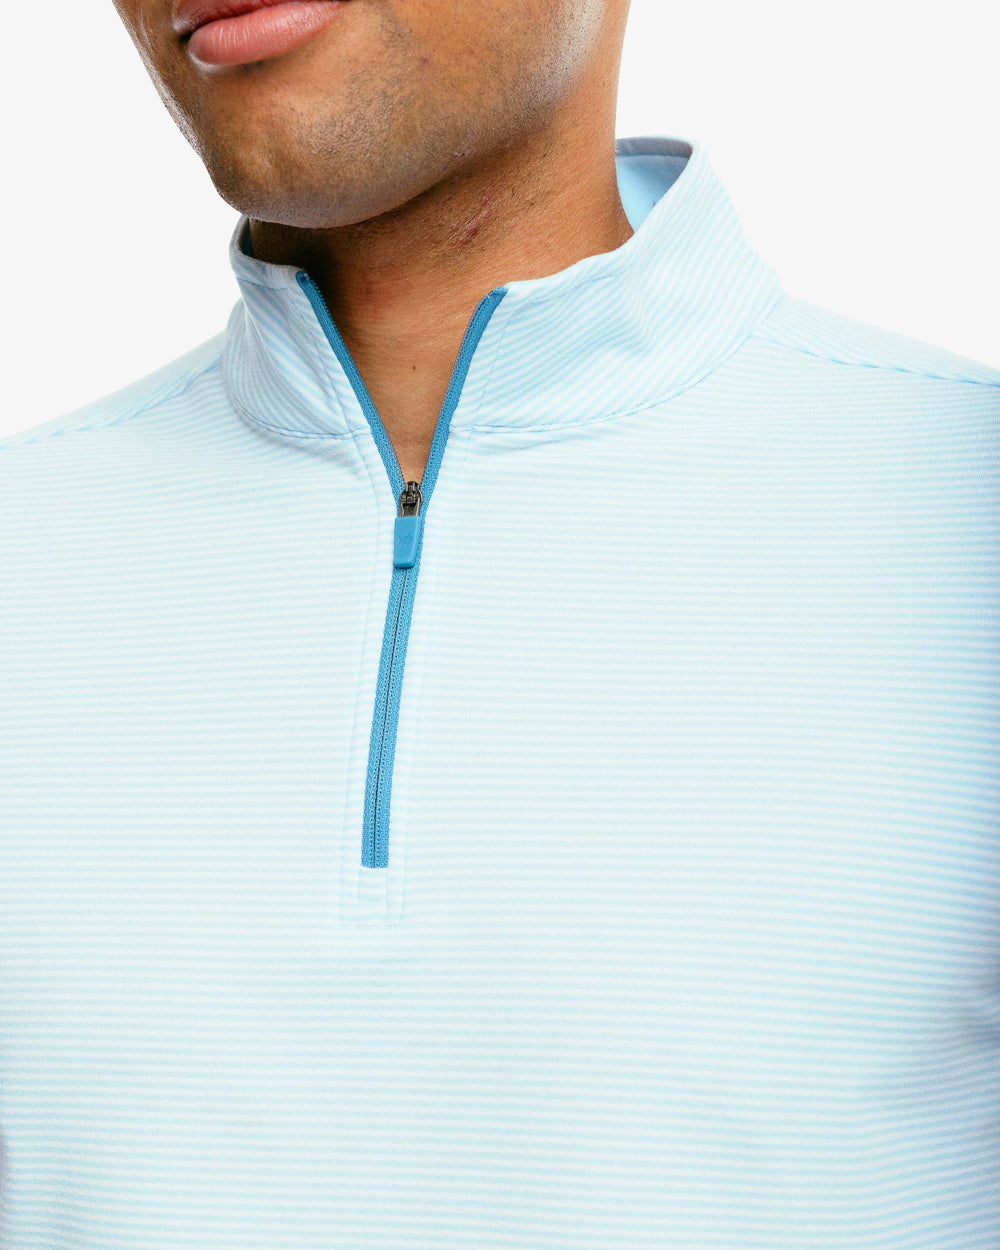 The detail of the Men's Cruiser Heather Micro Striped Performance Quarter Zip Pullover by Southern Tide - Heather Aquamarine